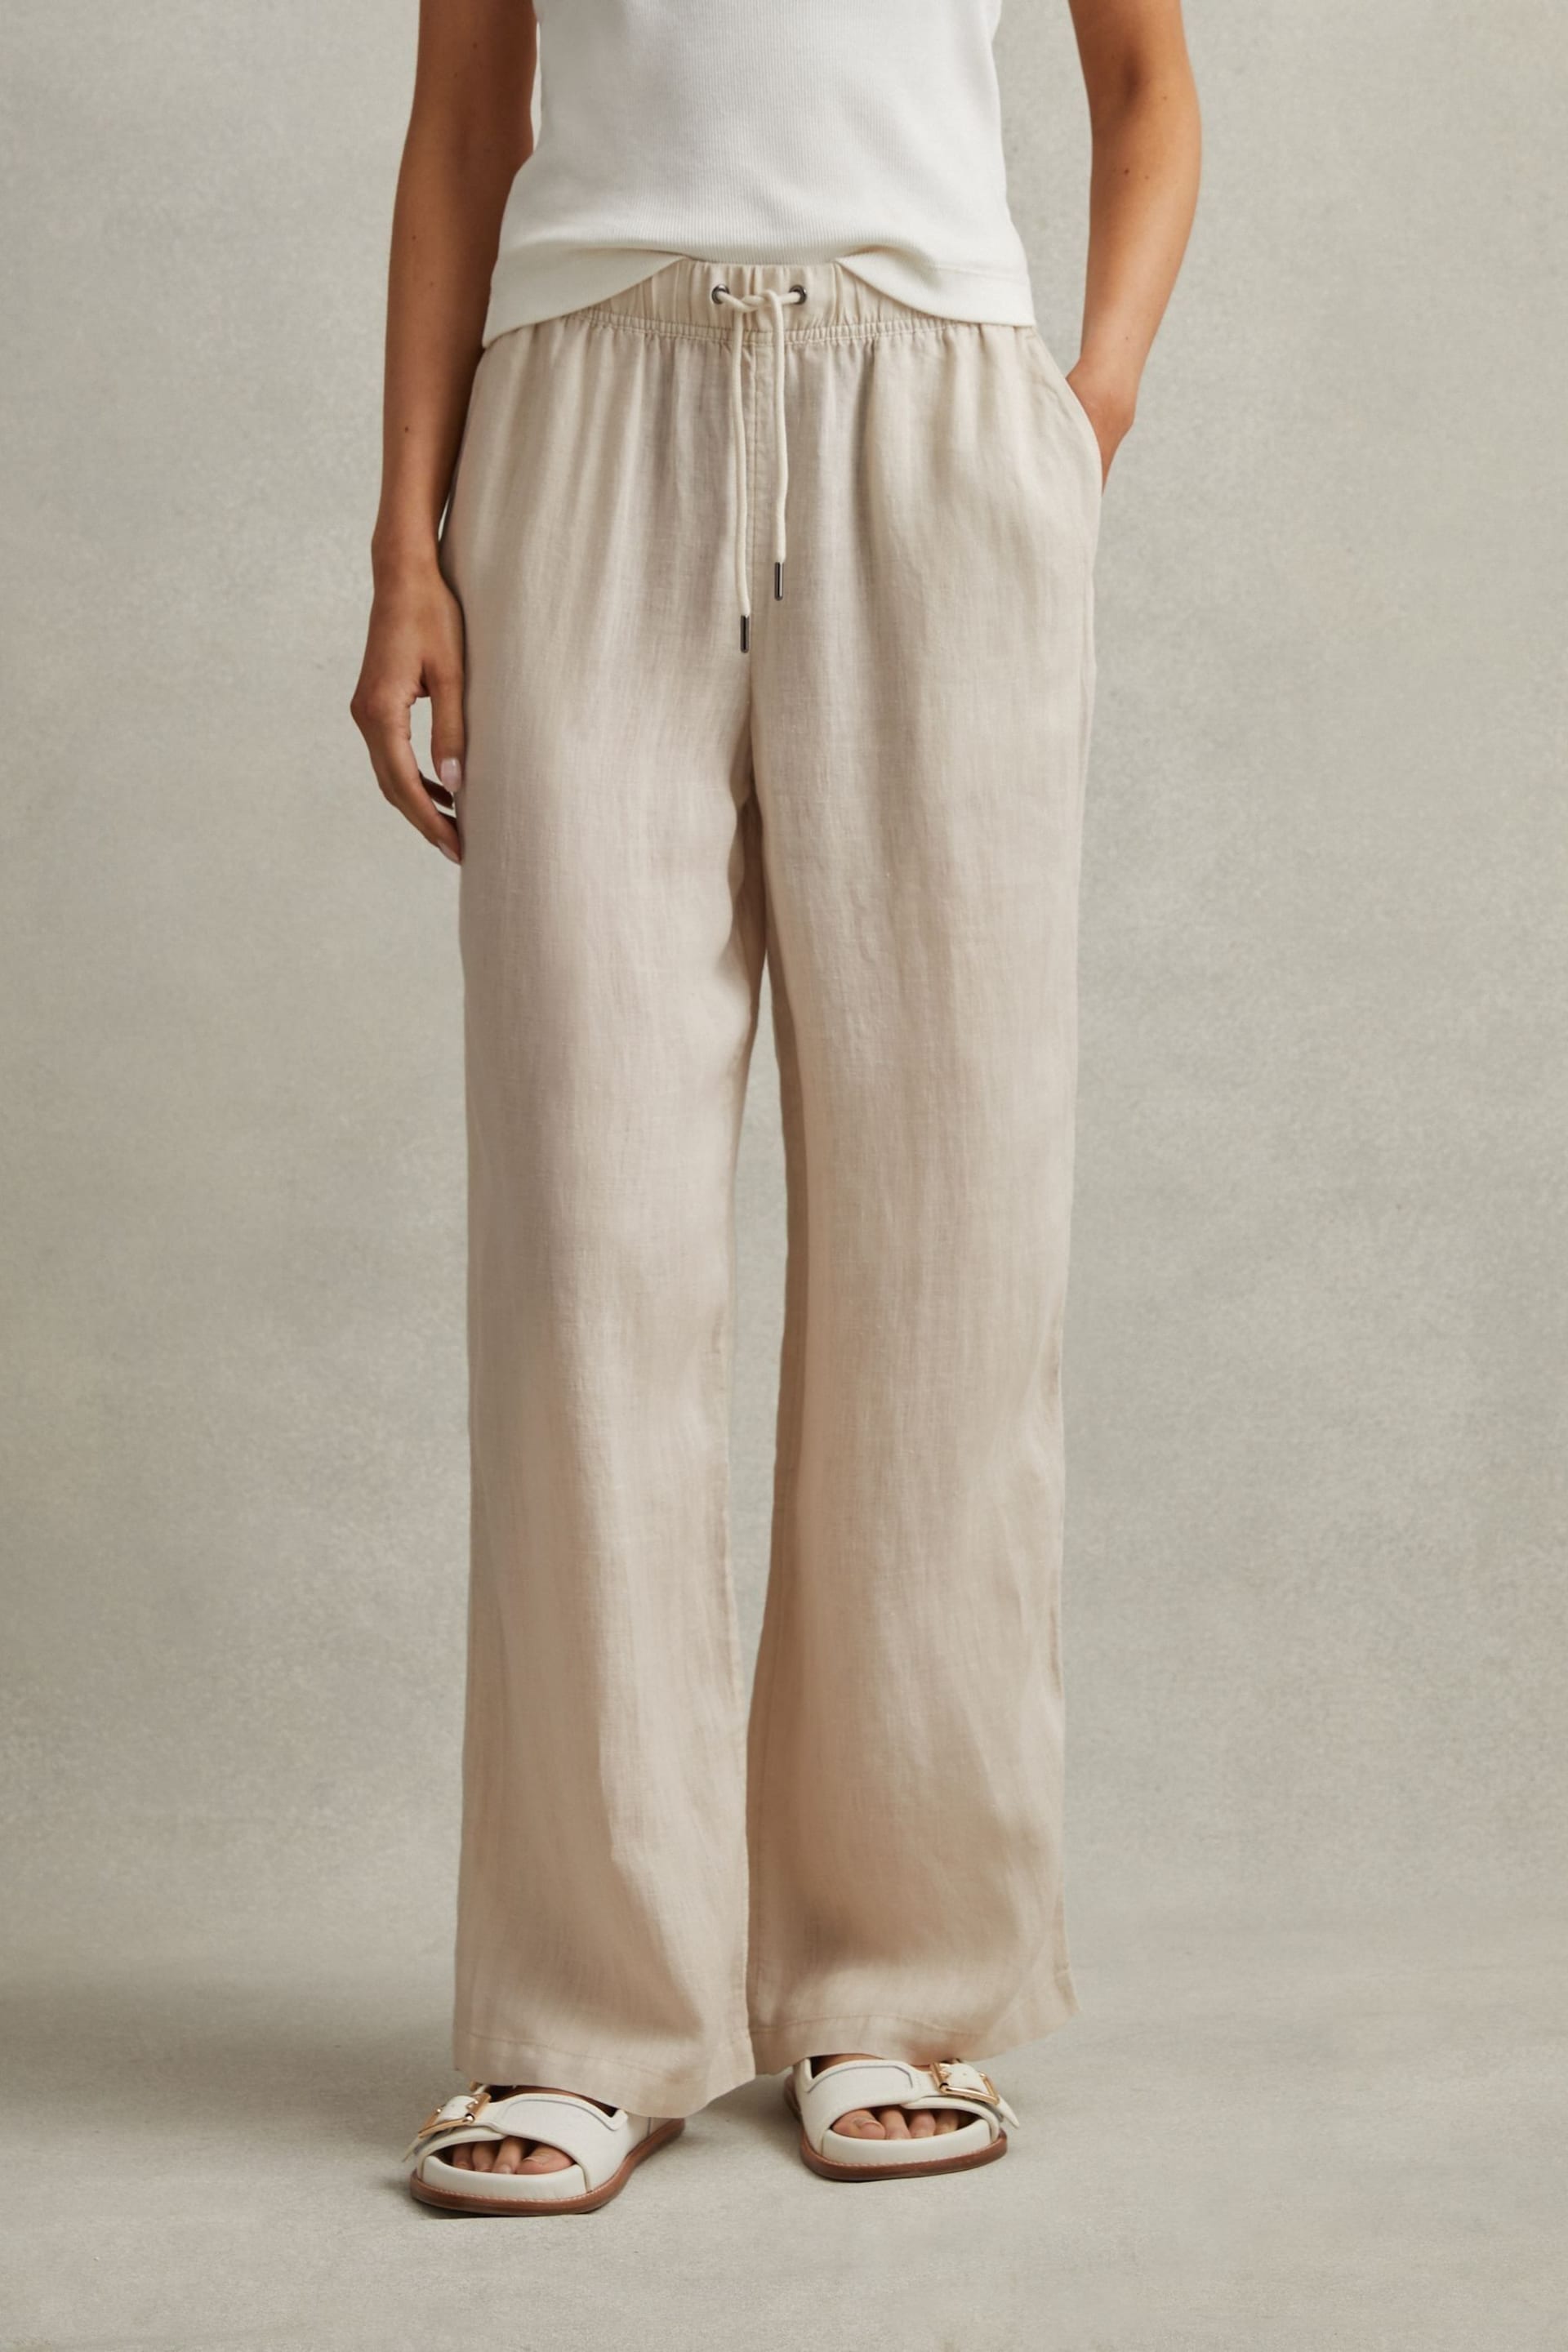 Reiss Oatmeal Cleo Garment Dyed Wide Leg Linen Trousers - Image 4 of 6